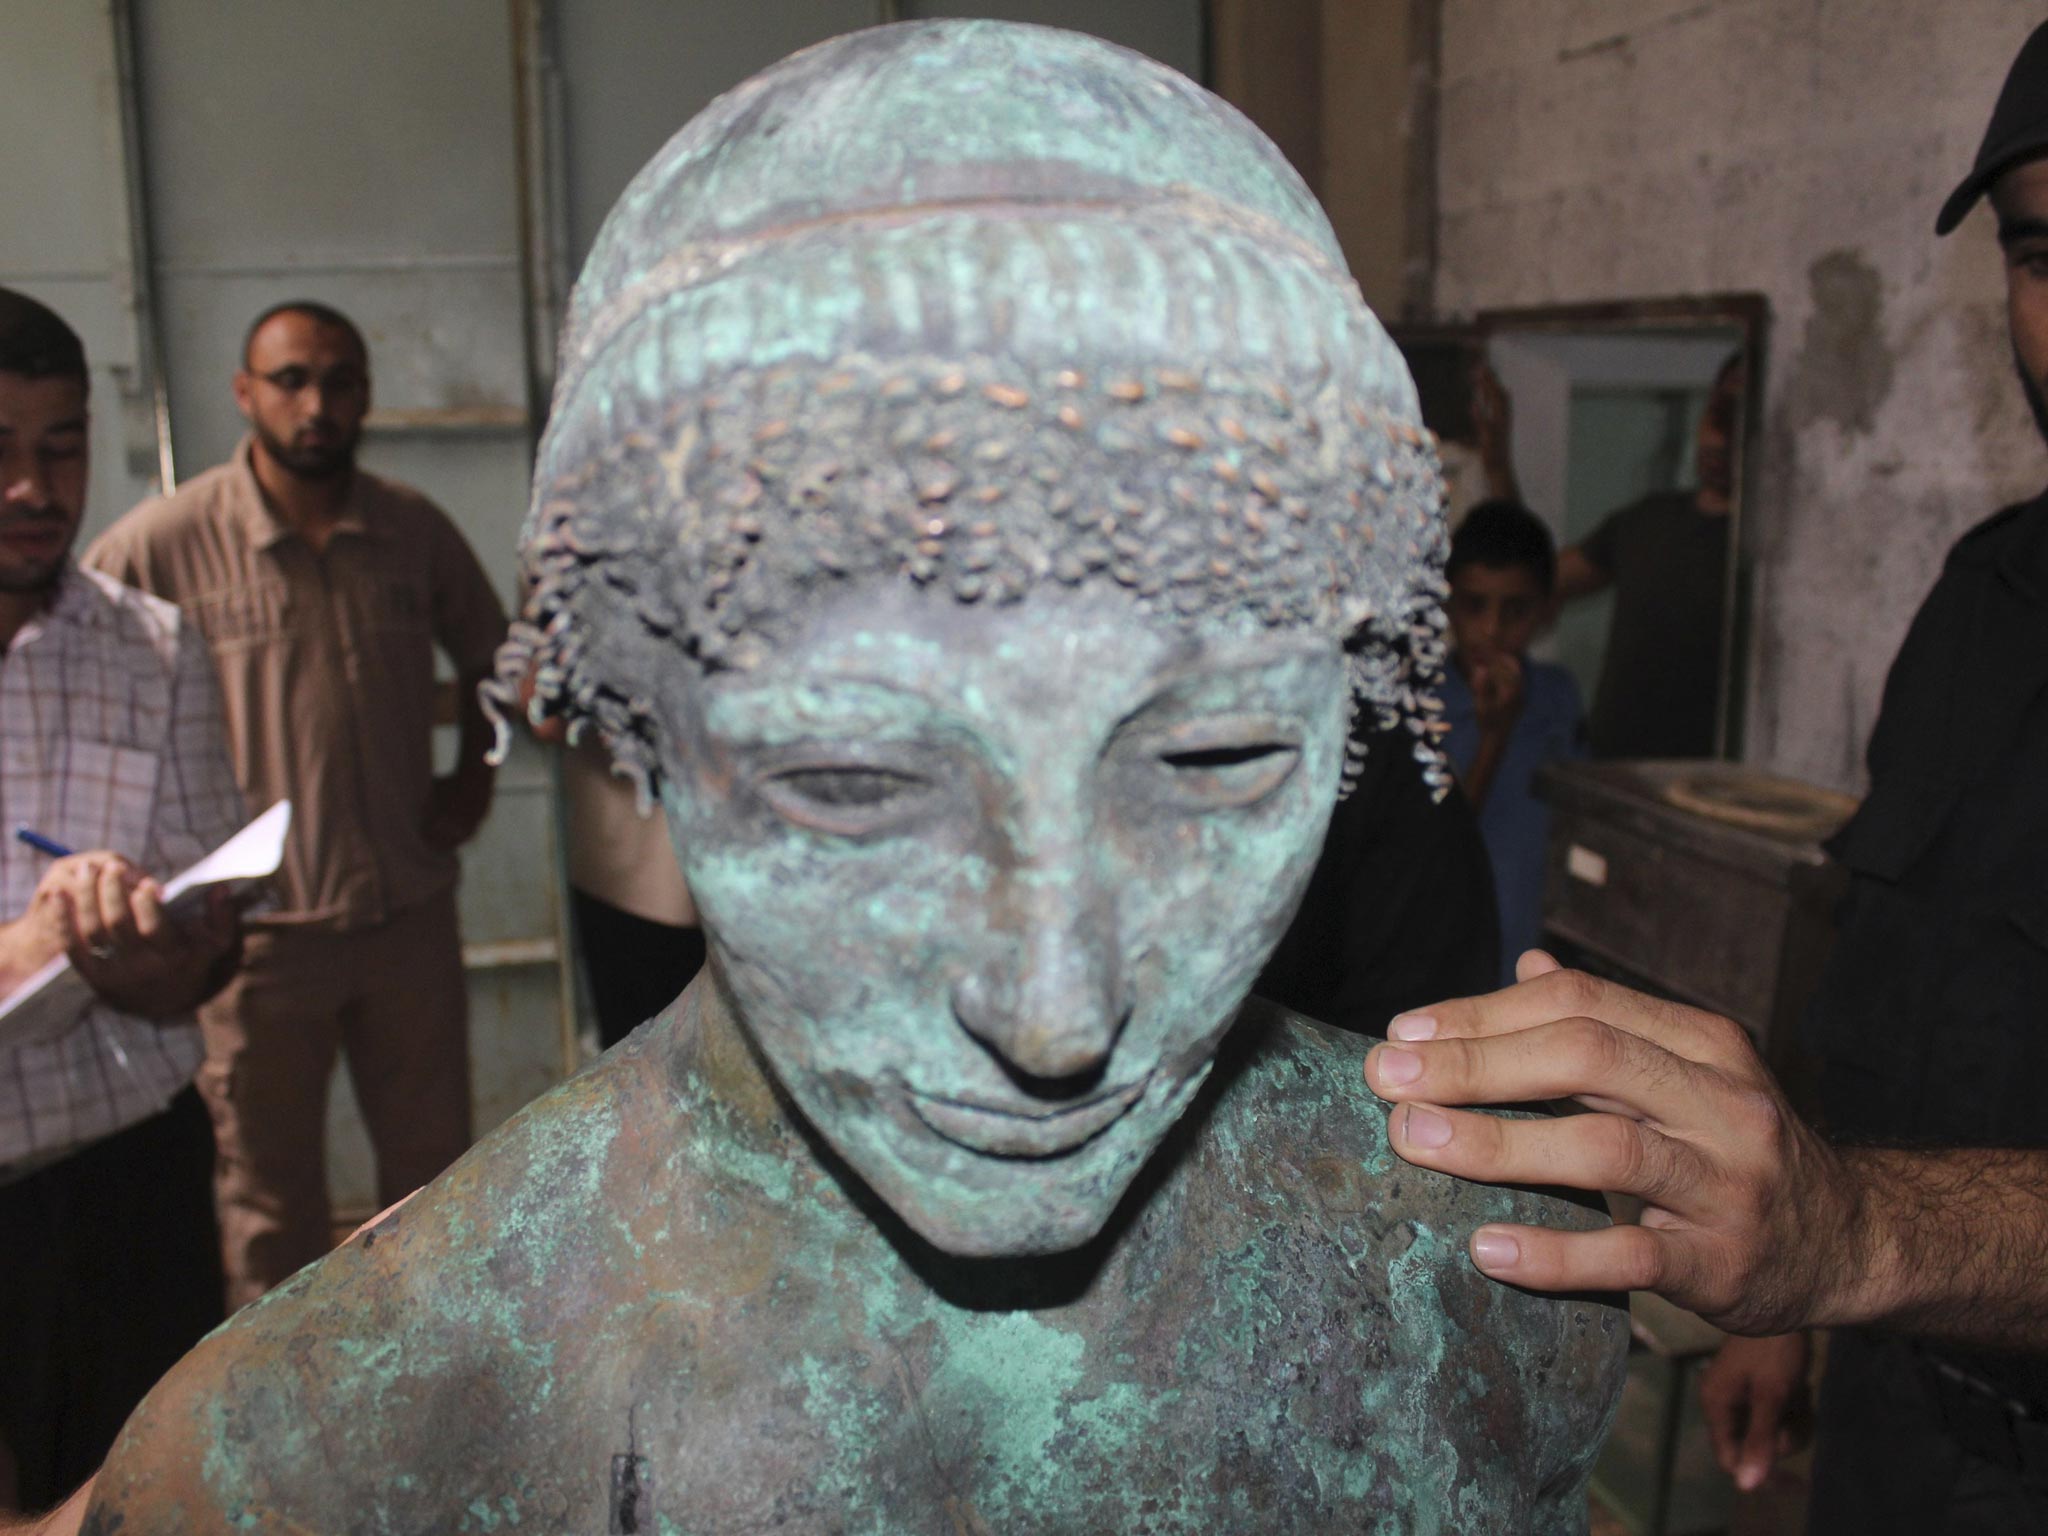 A bronze statue of the Greek god Apollo is pictured in Gaza